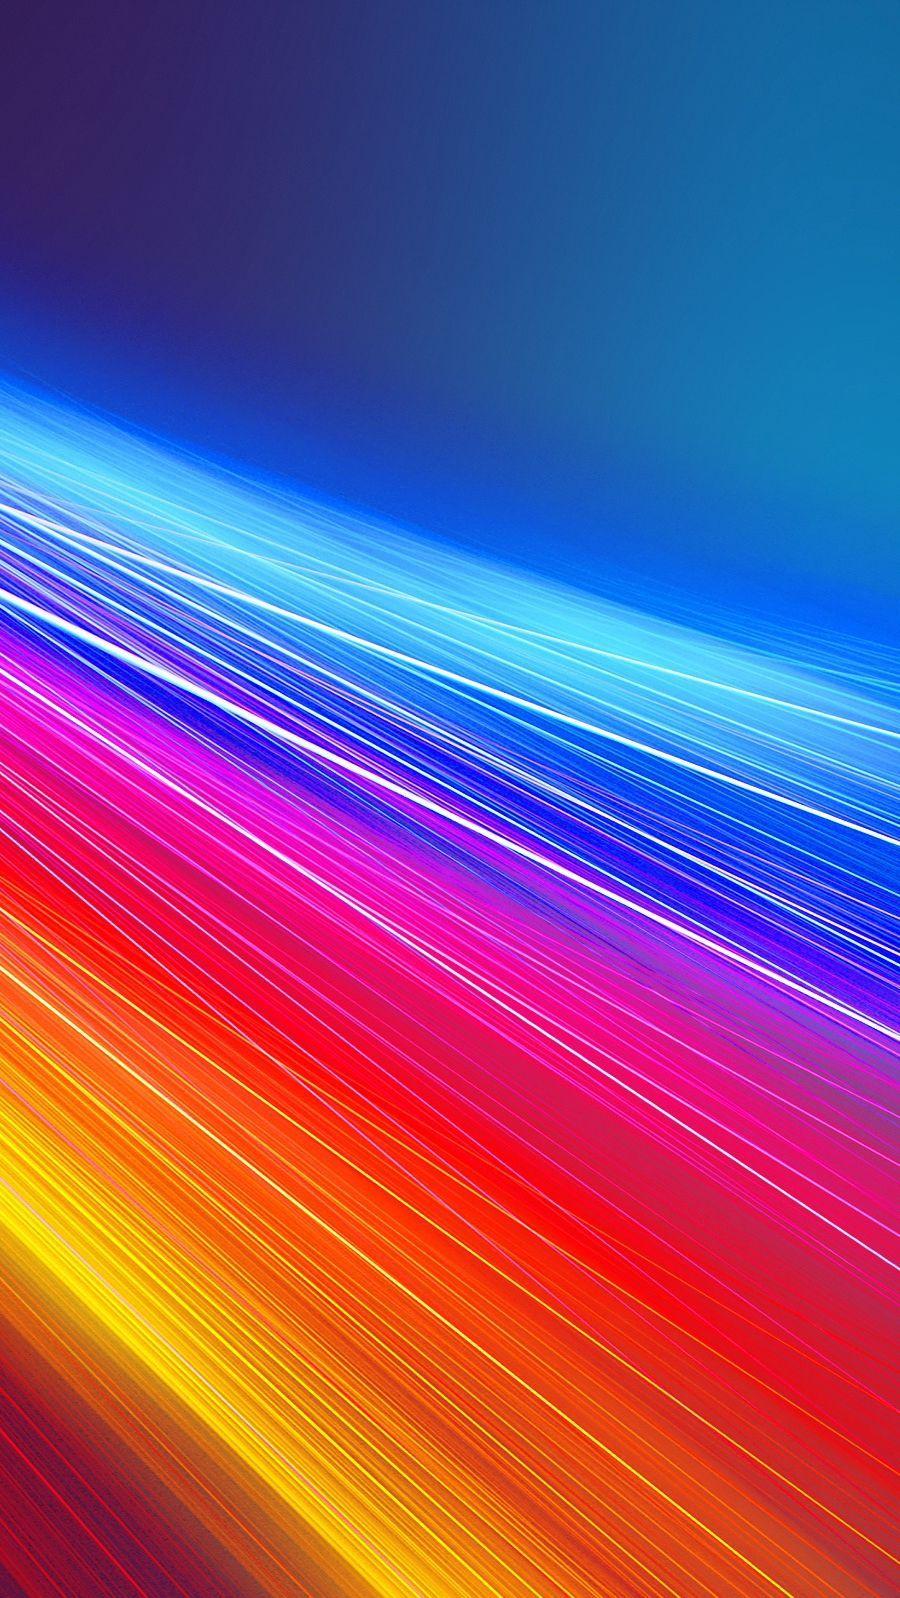 Android, Samsung, Wallpaper. Abstract iphone wallpaper, Abstract wallpaper, iPhone wallpaper